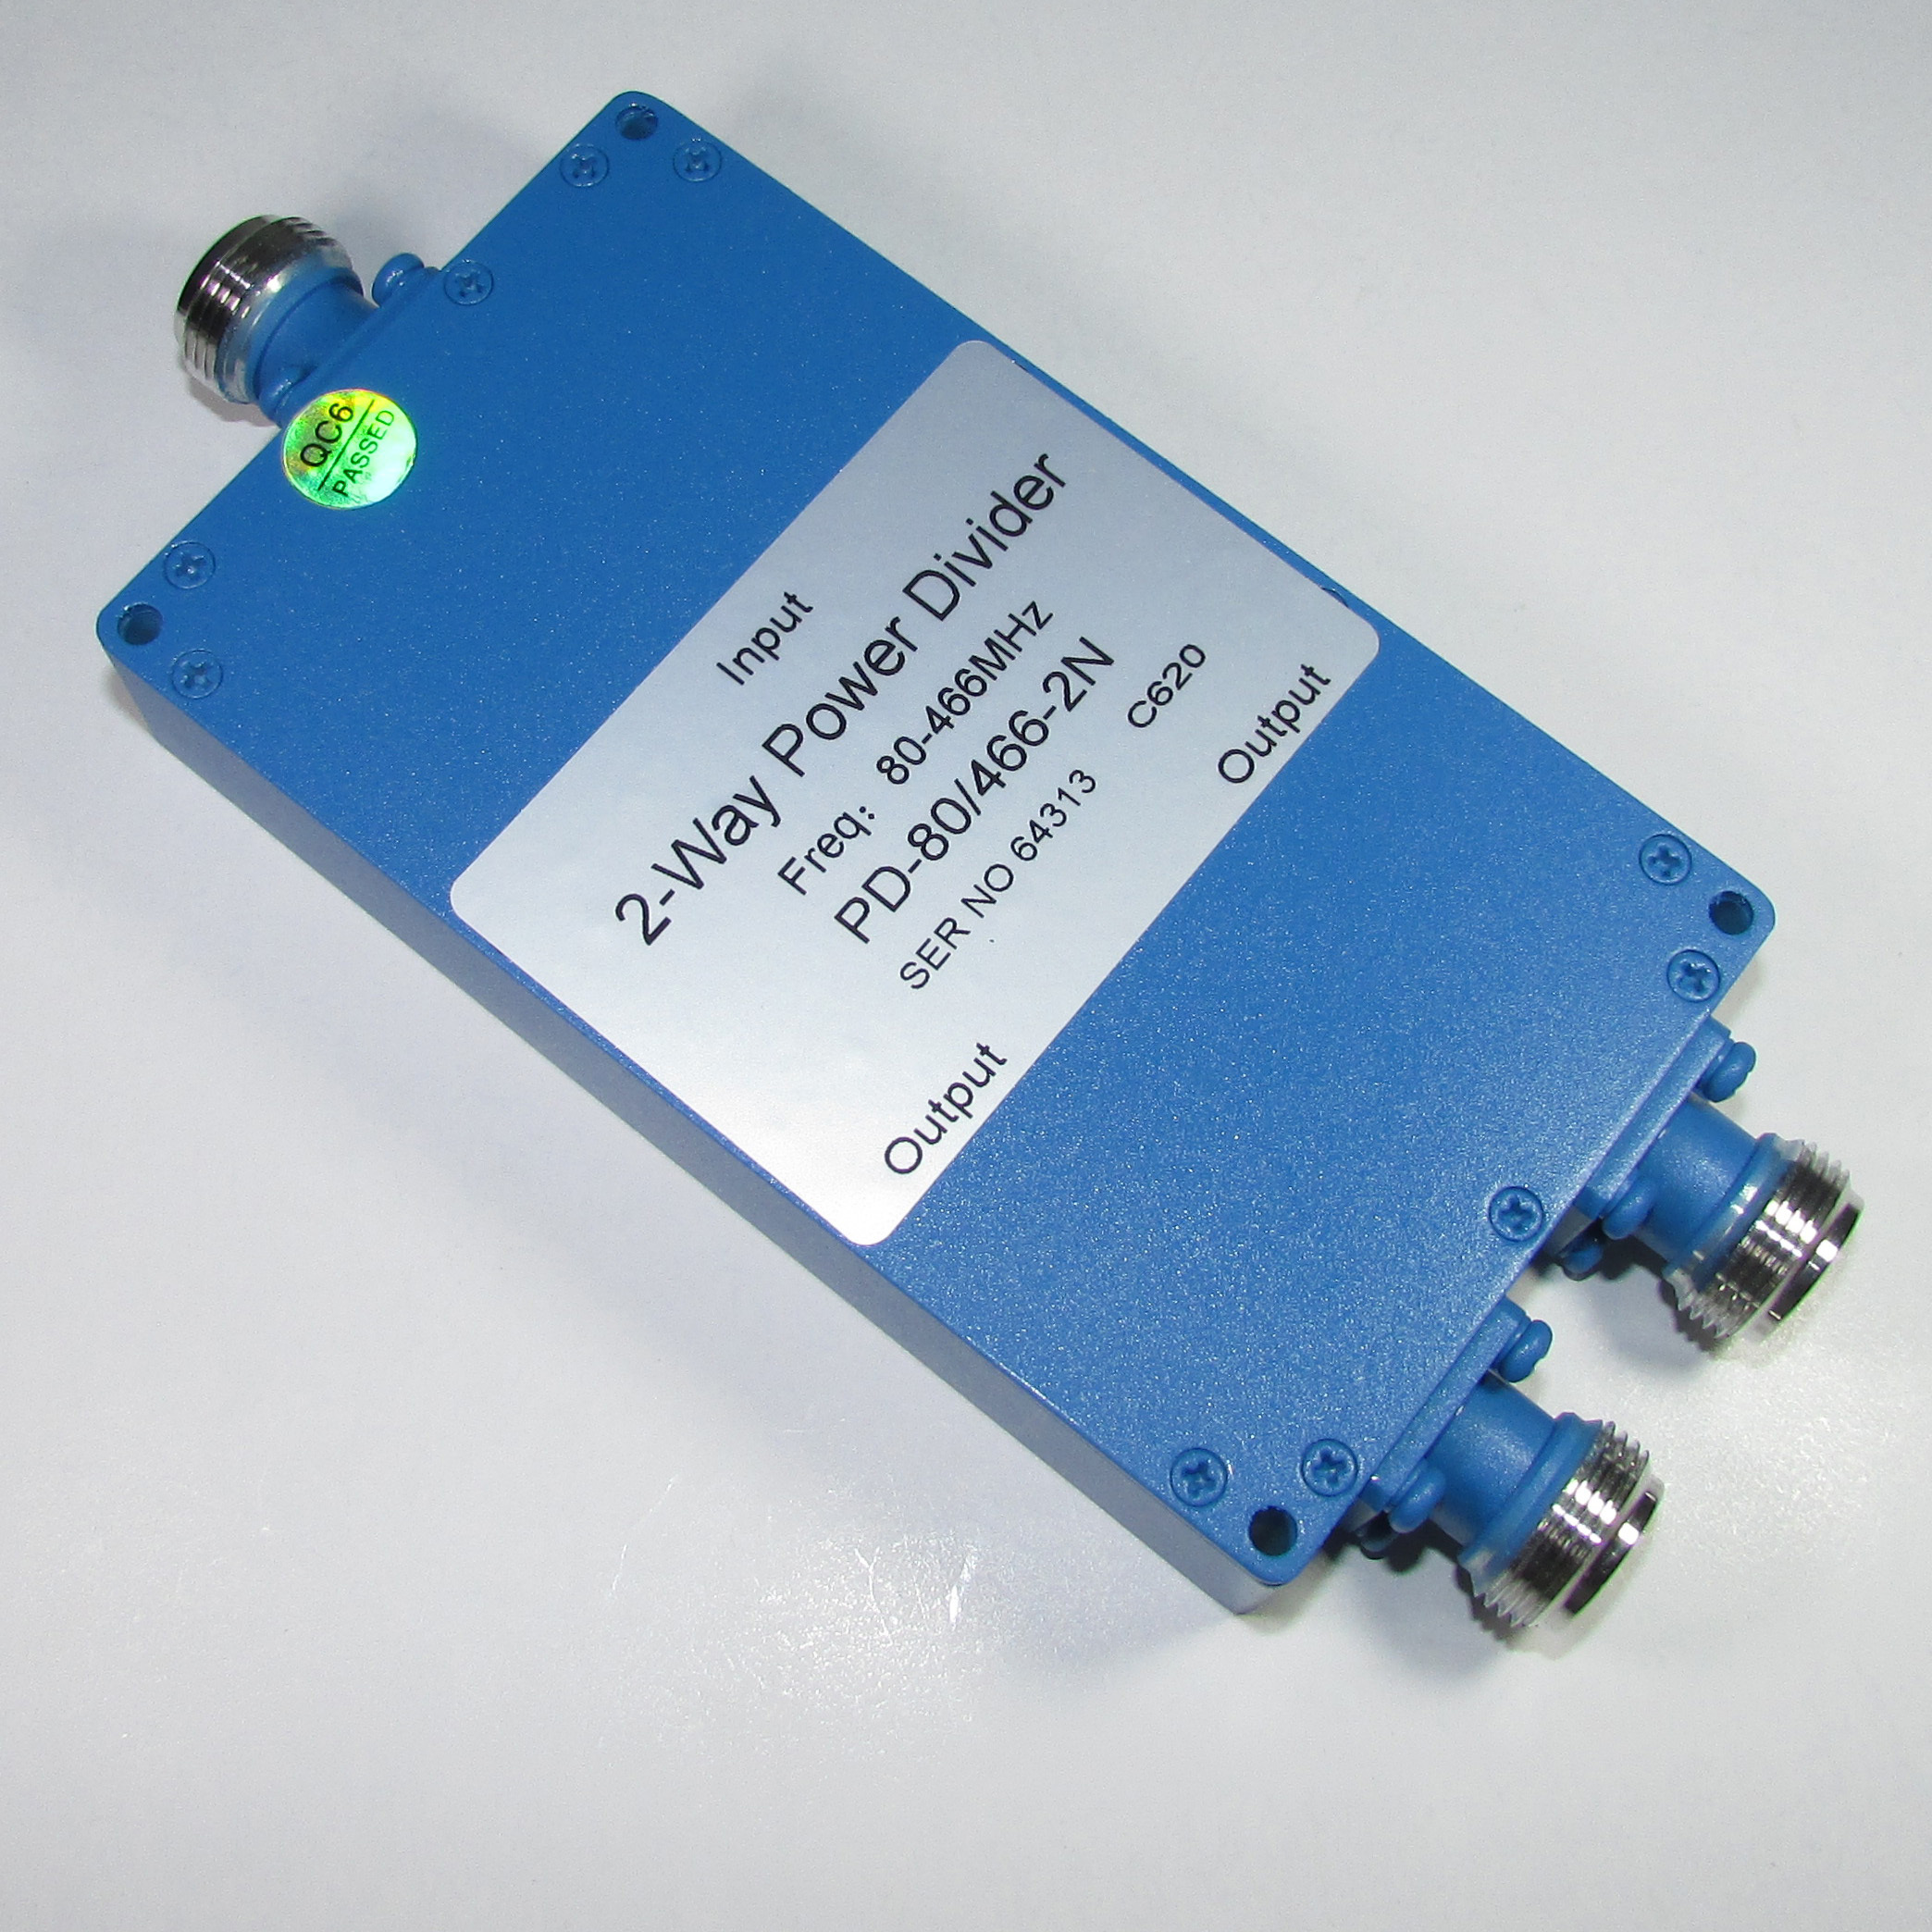 PD-80 / 466-2N 80-466MHz 30W N-type radio frequency one point two power divider / brand new / one year warranty